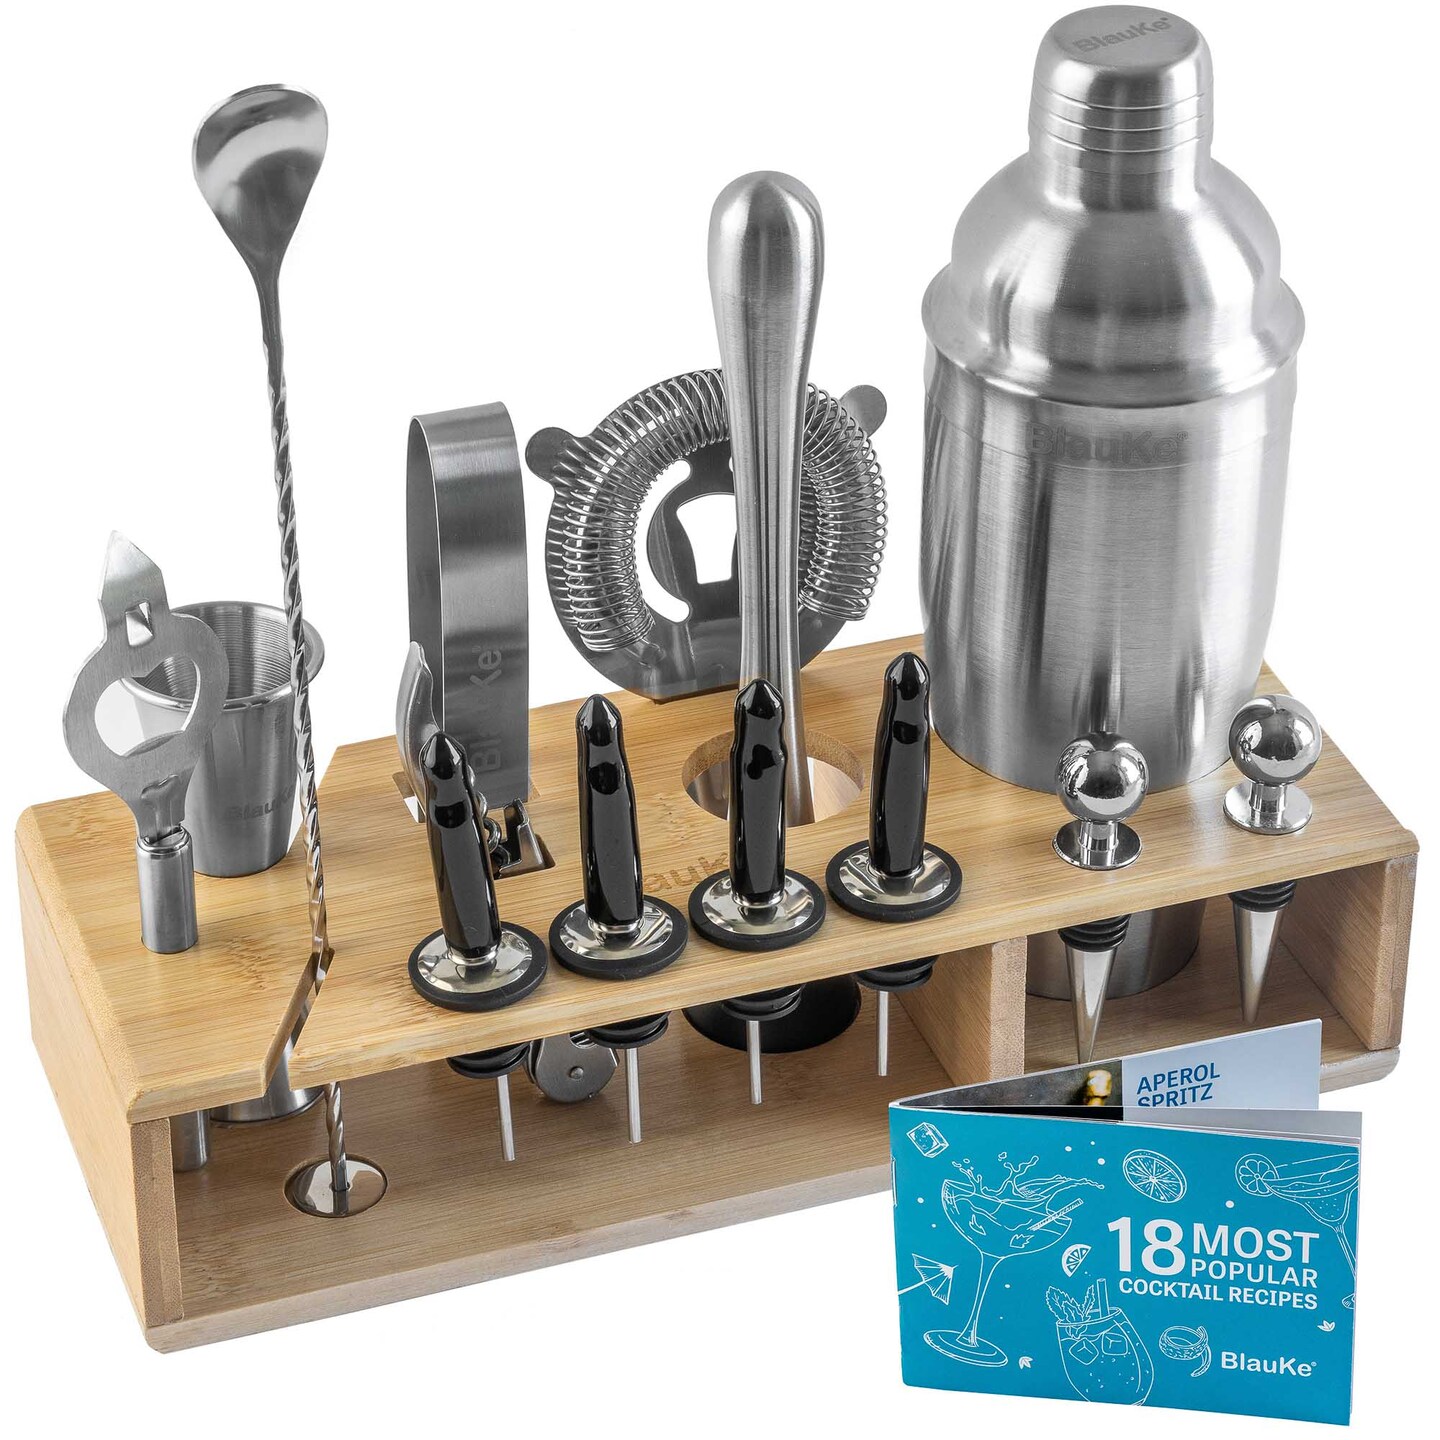 Stainless Steel Cocktail Shaker Set with Stand - 17-Piece Mixology Bartender Kit, Set - 25oz Shaker, Jigger, Strainer, Muddler, Mixing Spoon Michaels